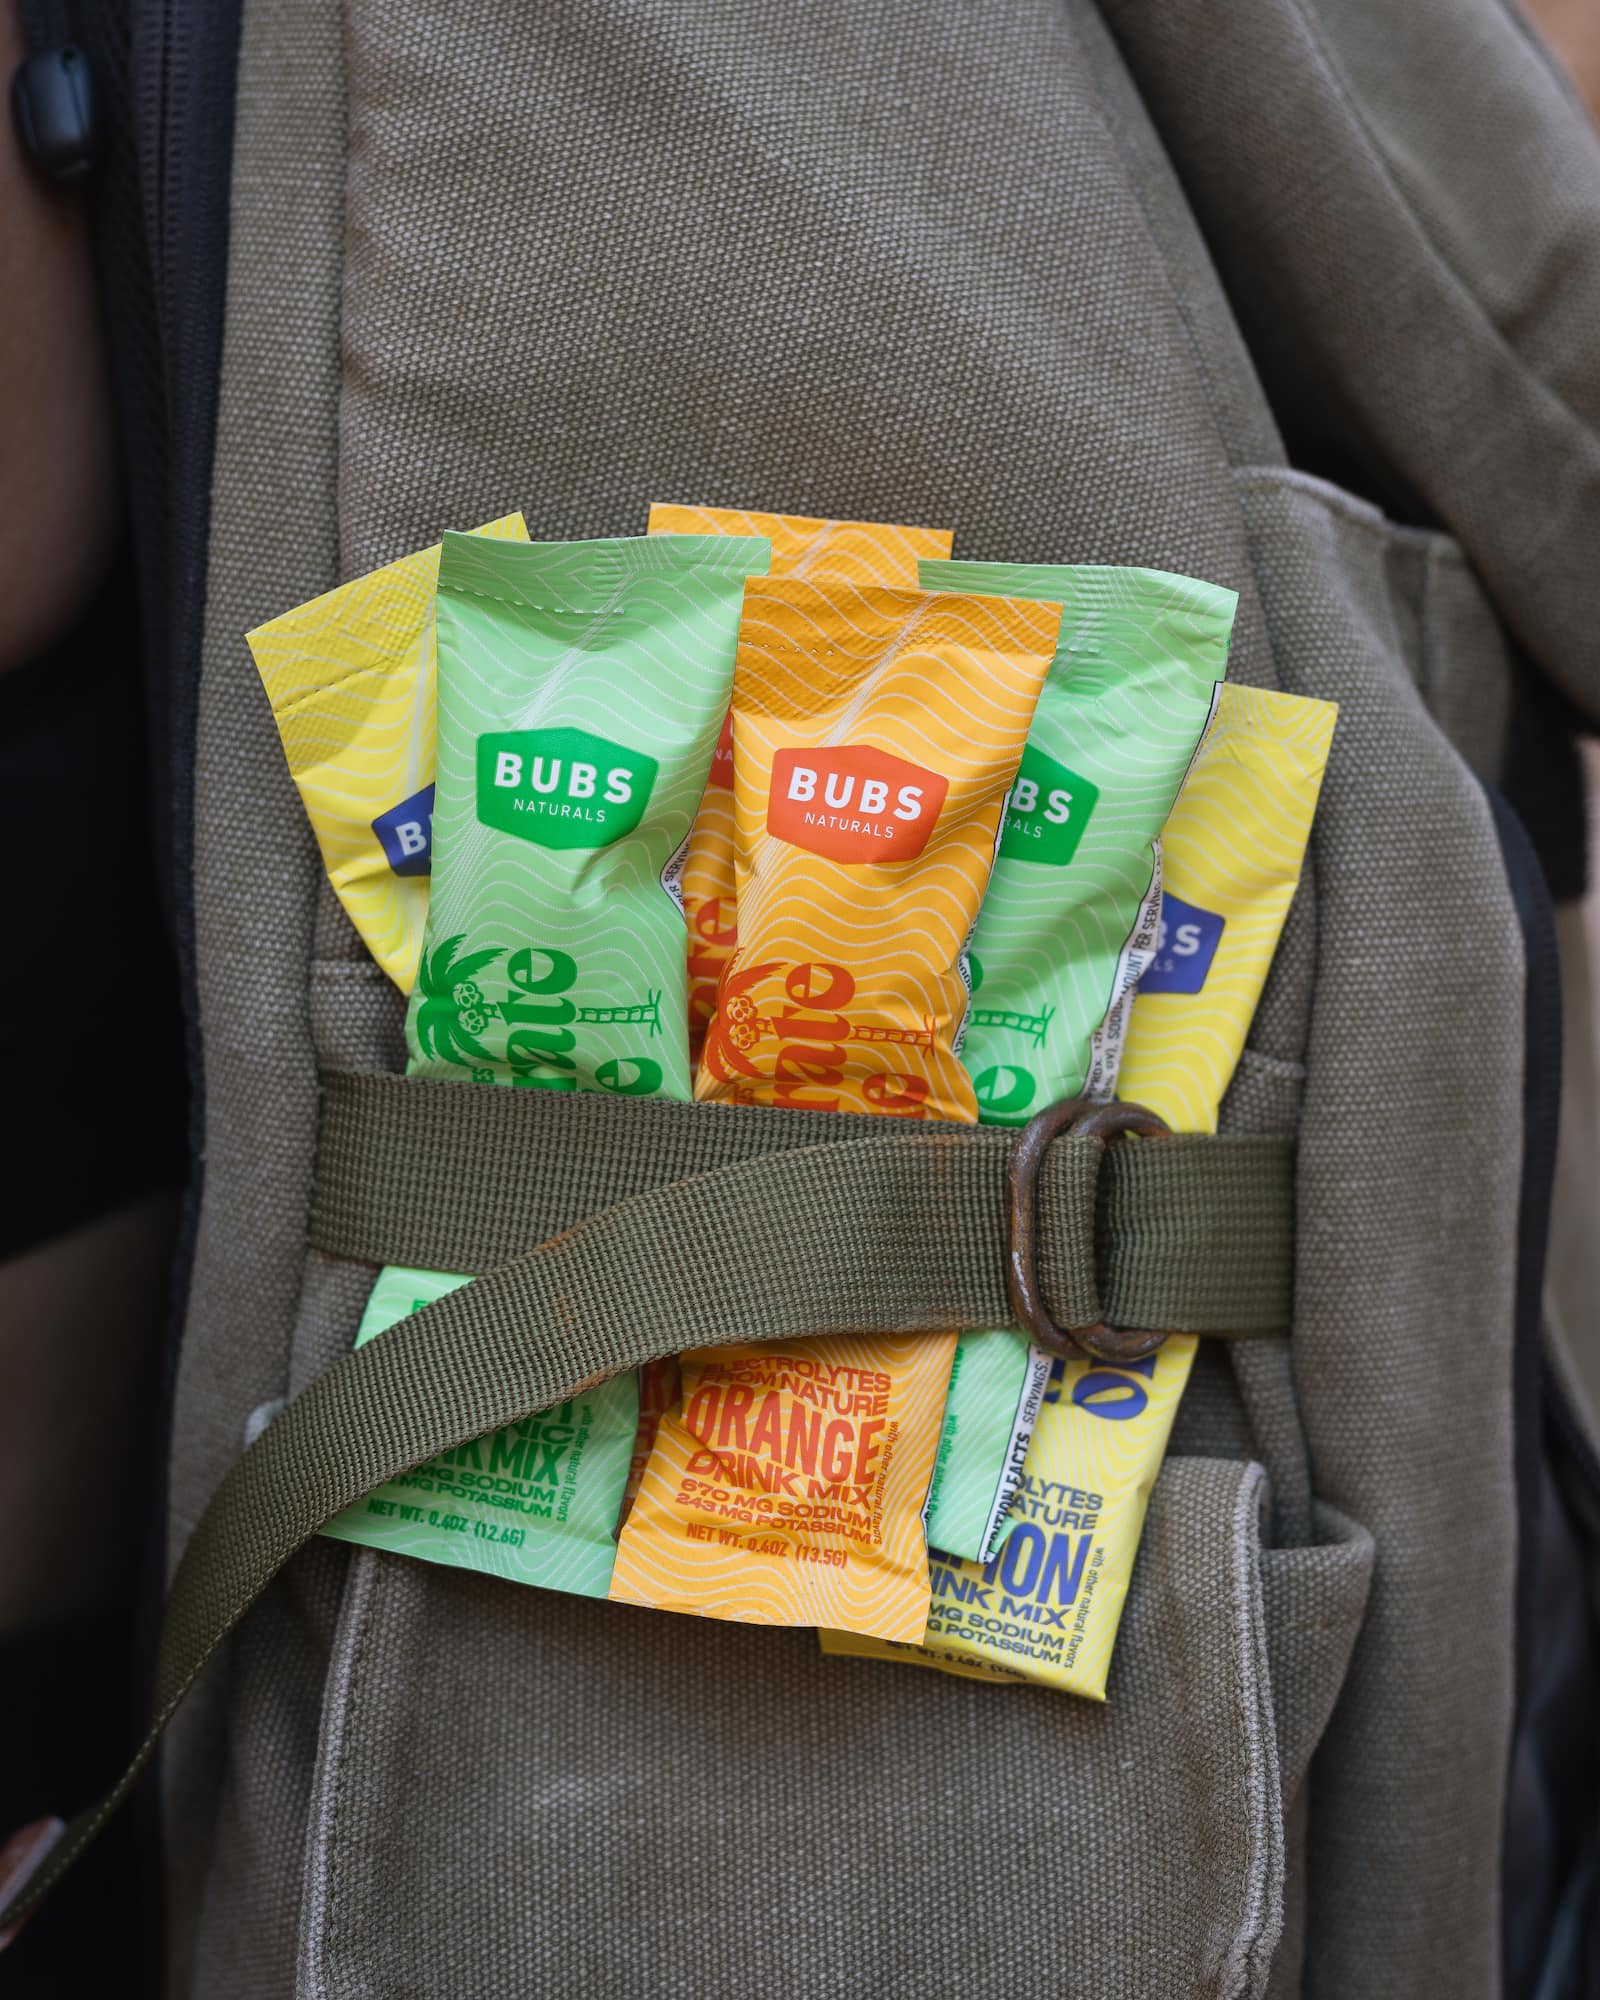 BUBS Naturals Hydrate or Die Electrolyte Packs being taken on hike in a backpack
